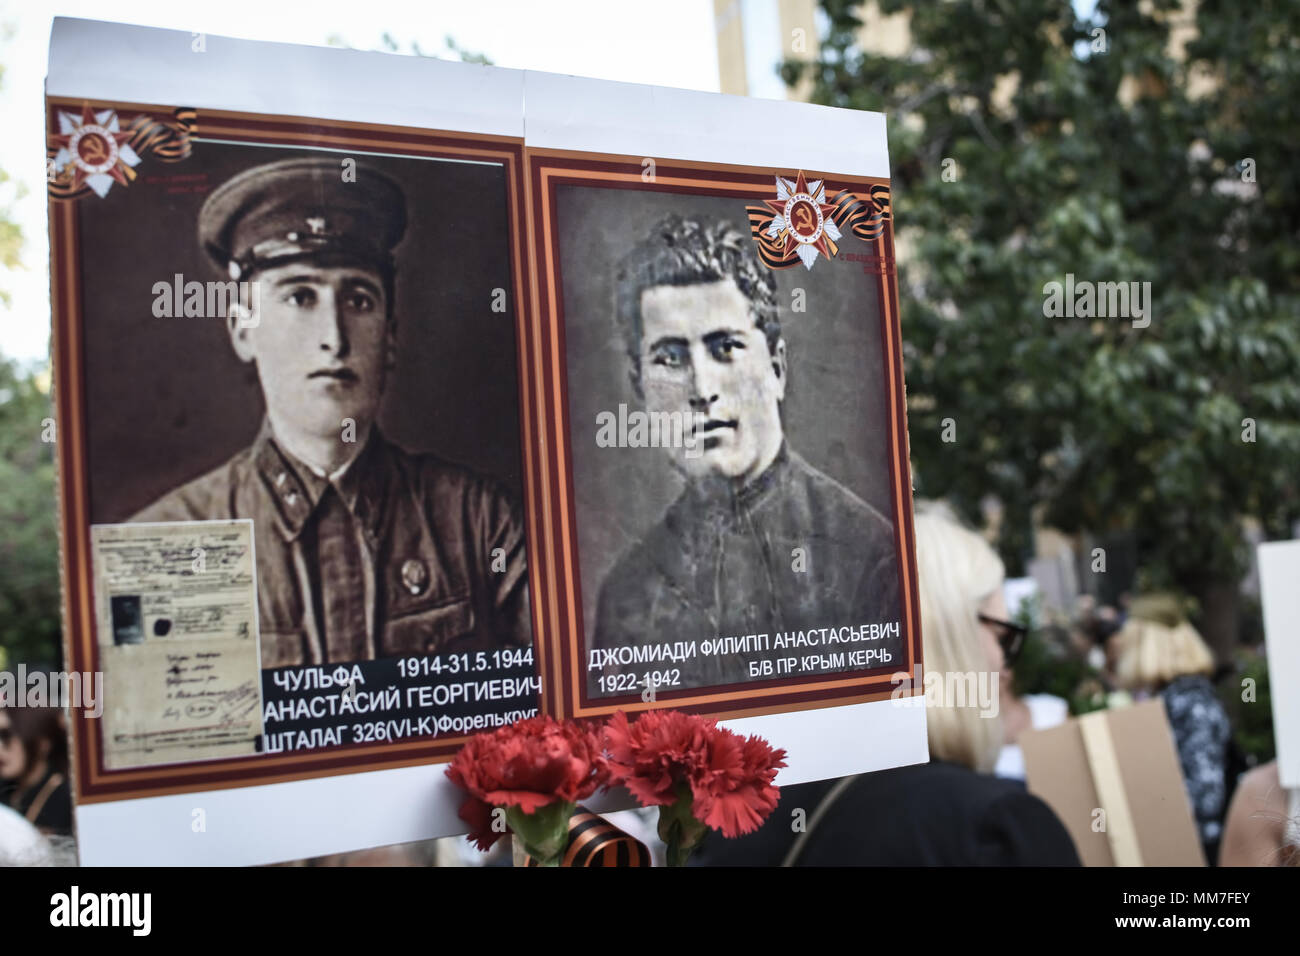 A placard with two old photographs seen at The Immortal Regiment march. Thousands of Russian citizens participated in the celebrations for the 73rd anniversary of the victory against fascism, which has been established as a Victory Day. With the military parade as well as the demonstration, the festive event took place across Russia, with citizens holding photos of their relatives who have either fought or been killed during the World War. Stock Photo